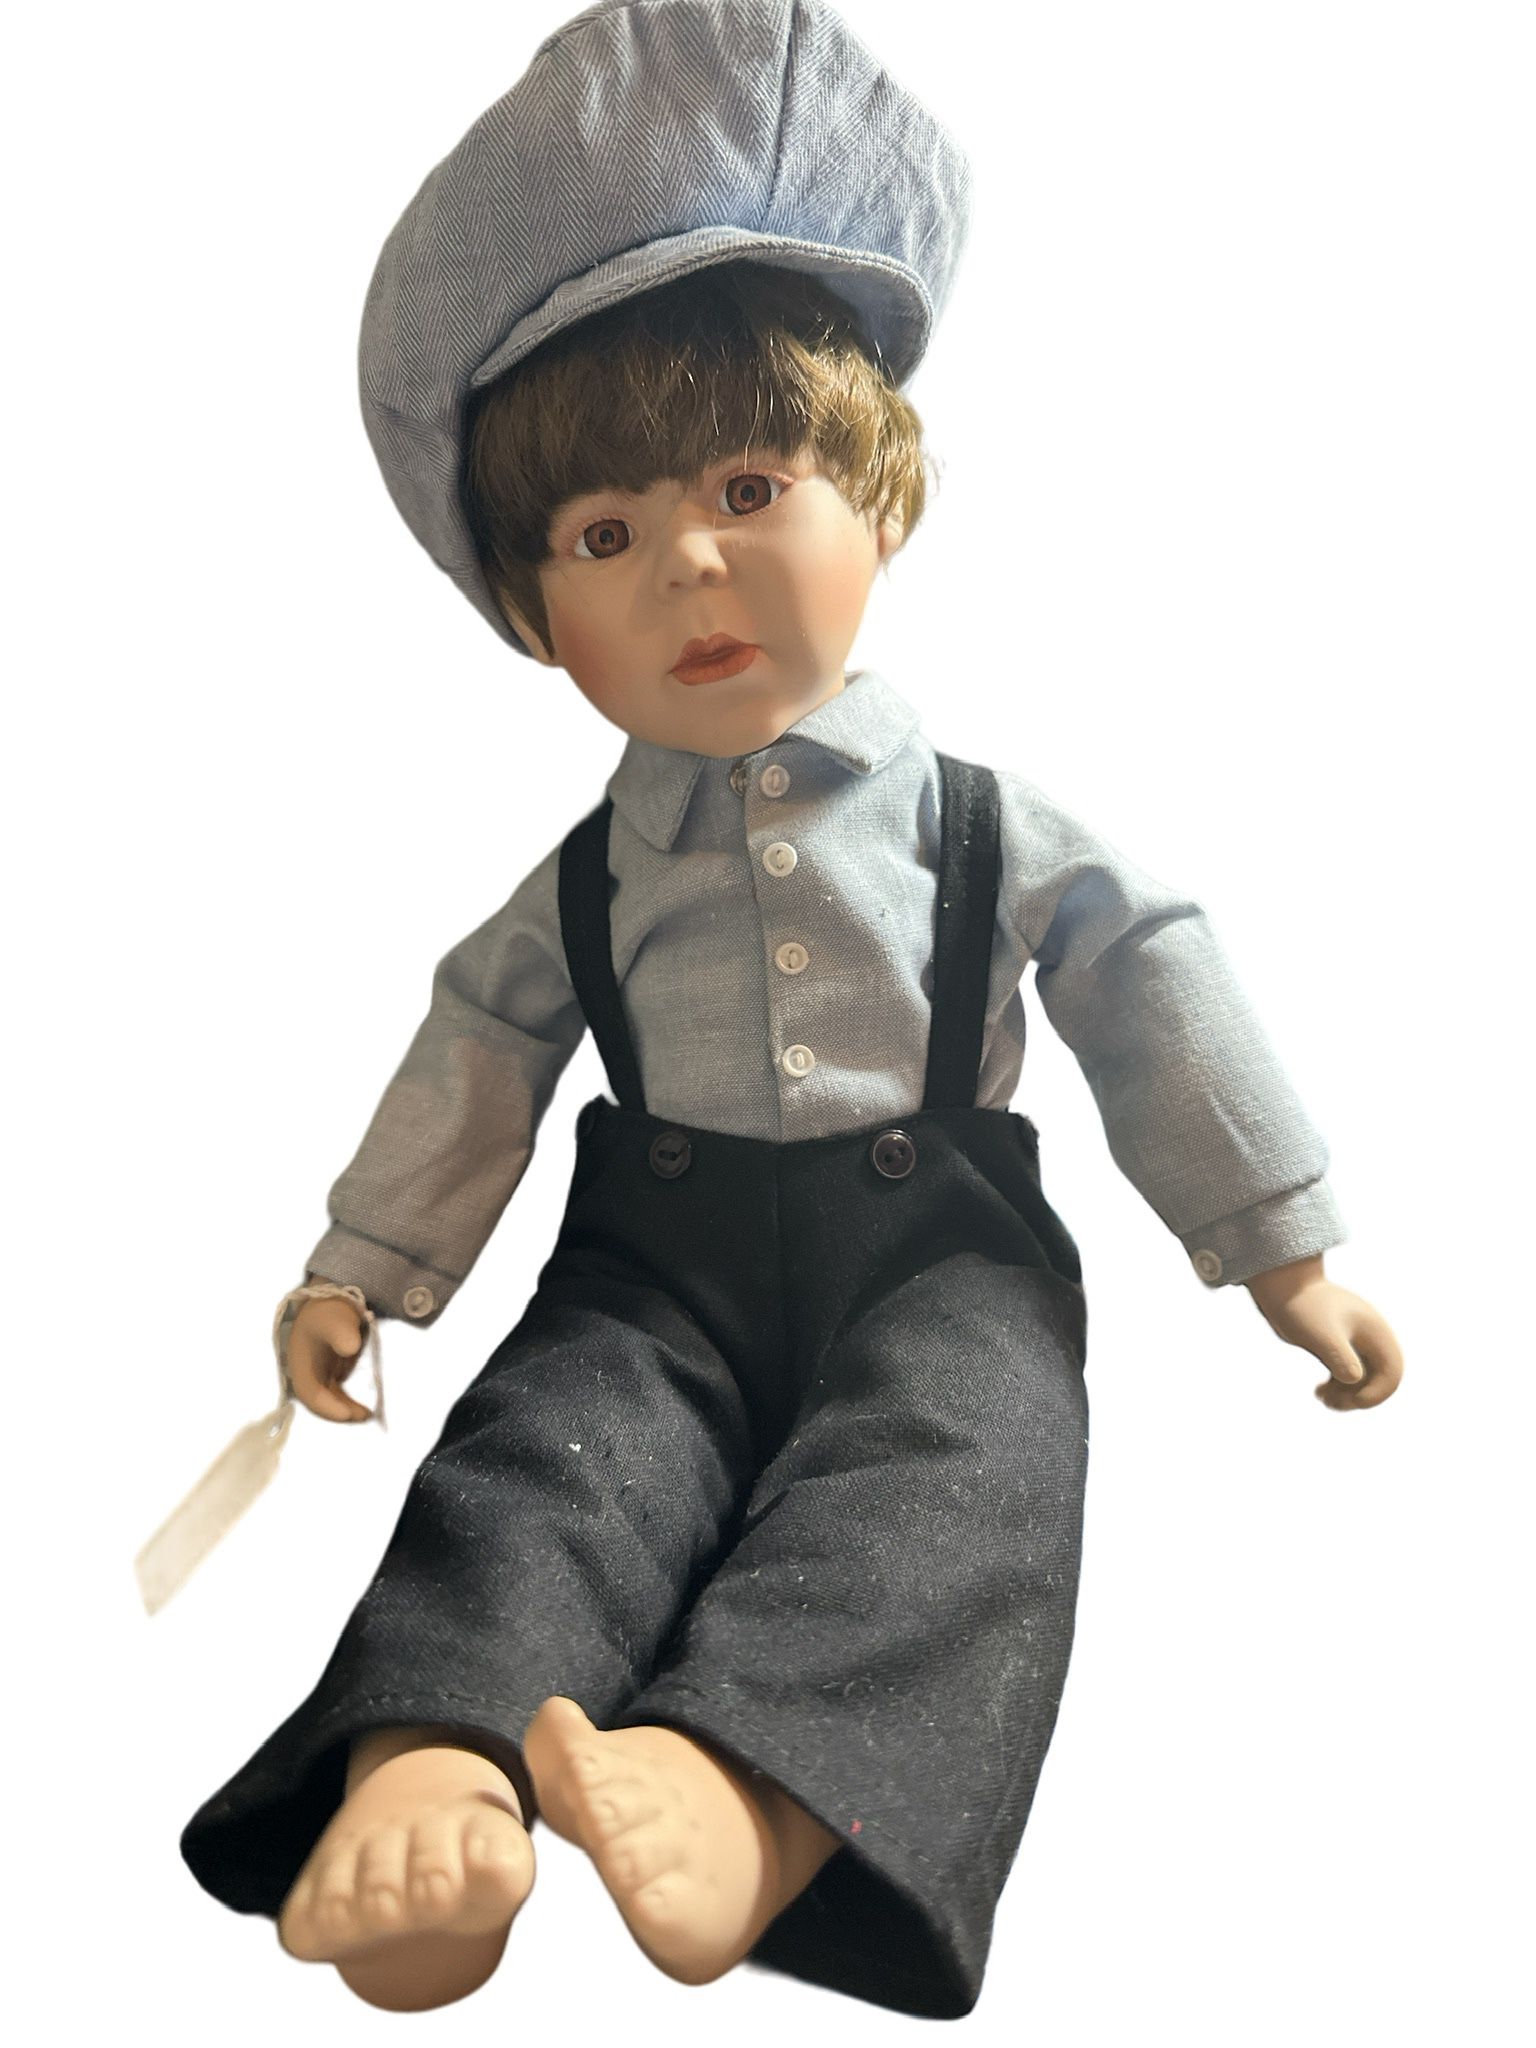 Doll  beautiful Porcelain Amish little Boy doll in in Gift quality Pre-owned excellent condition. No original box. T-195